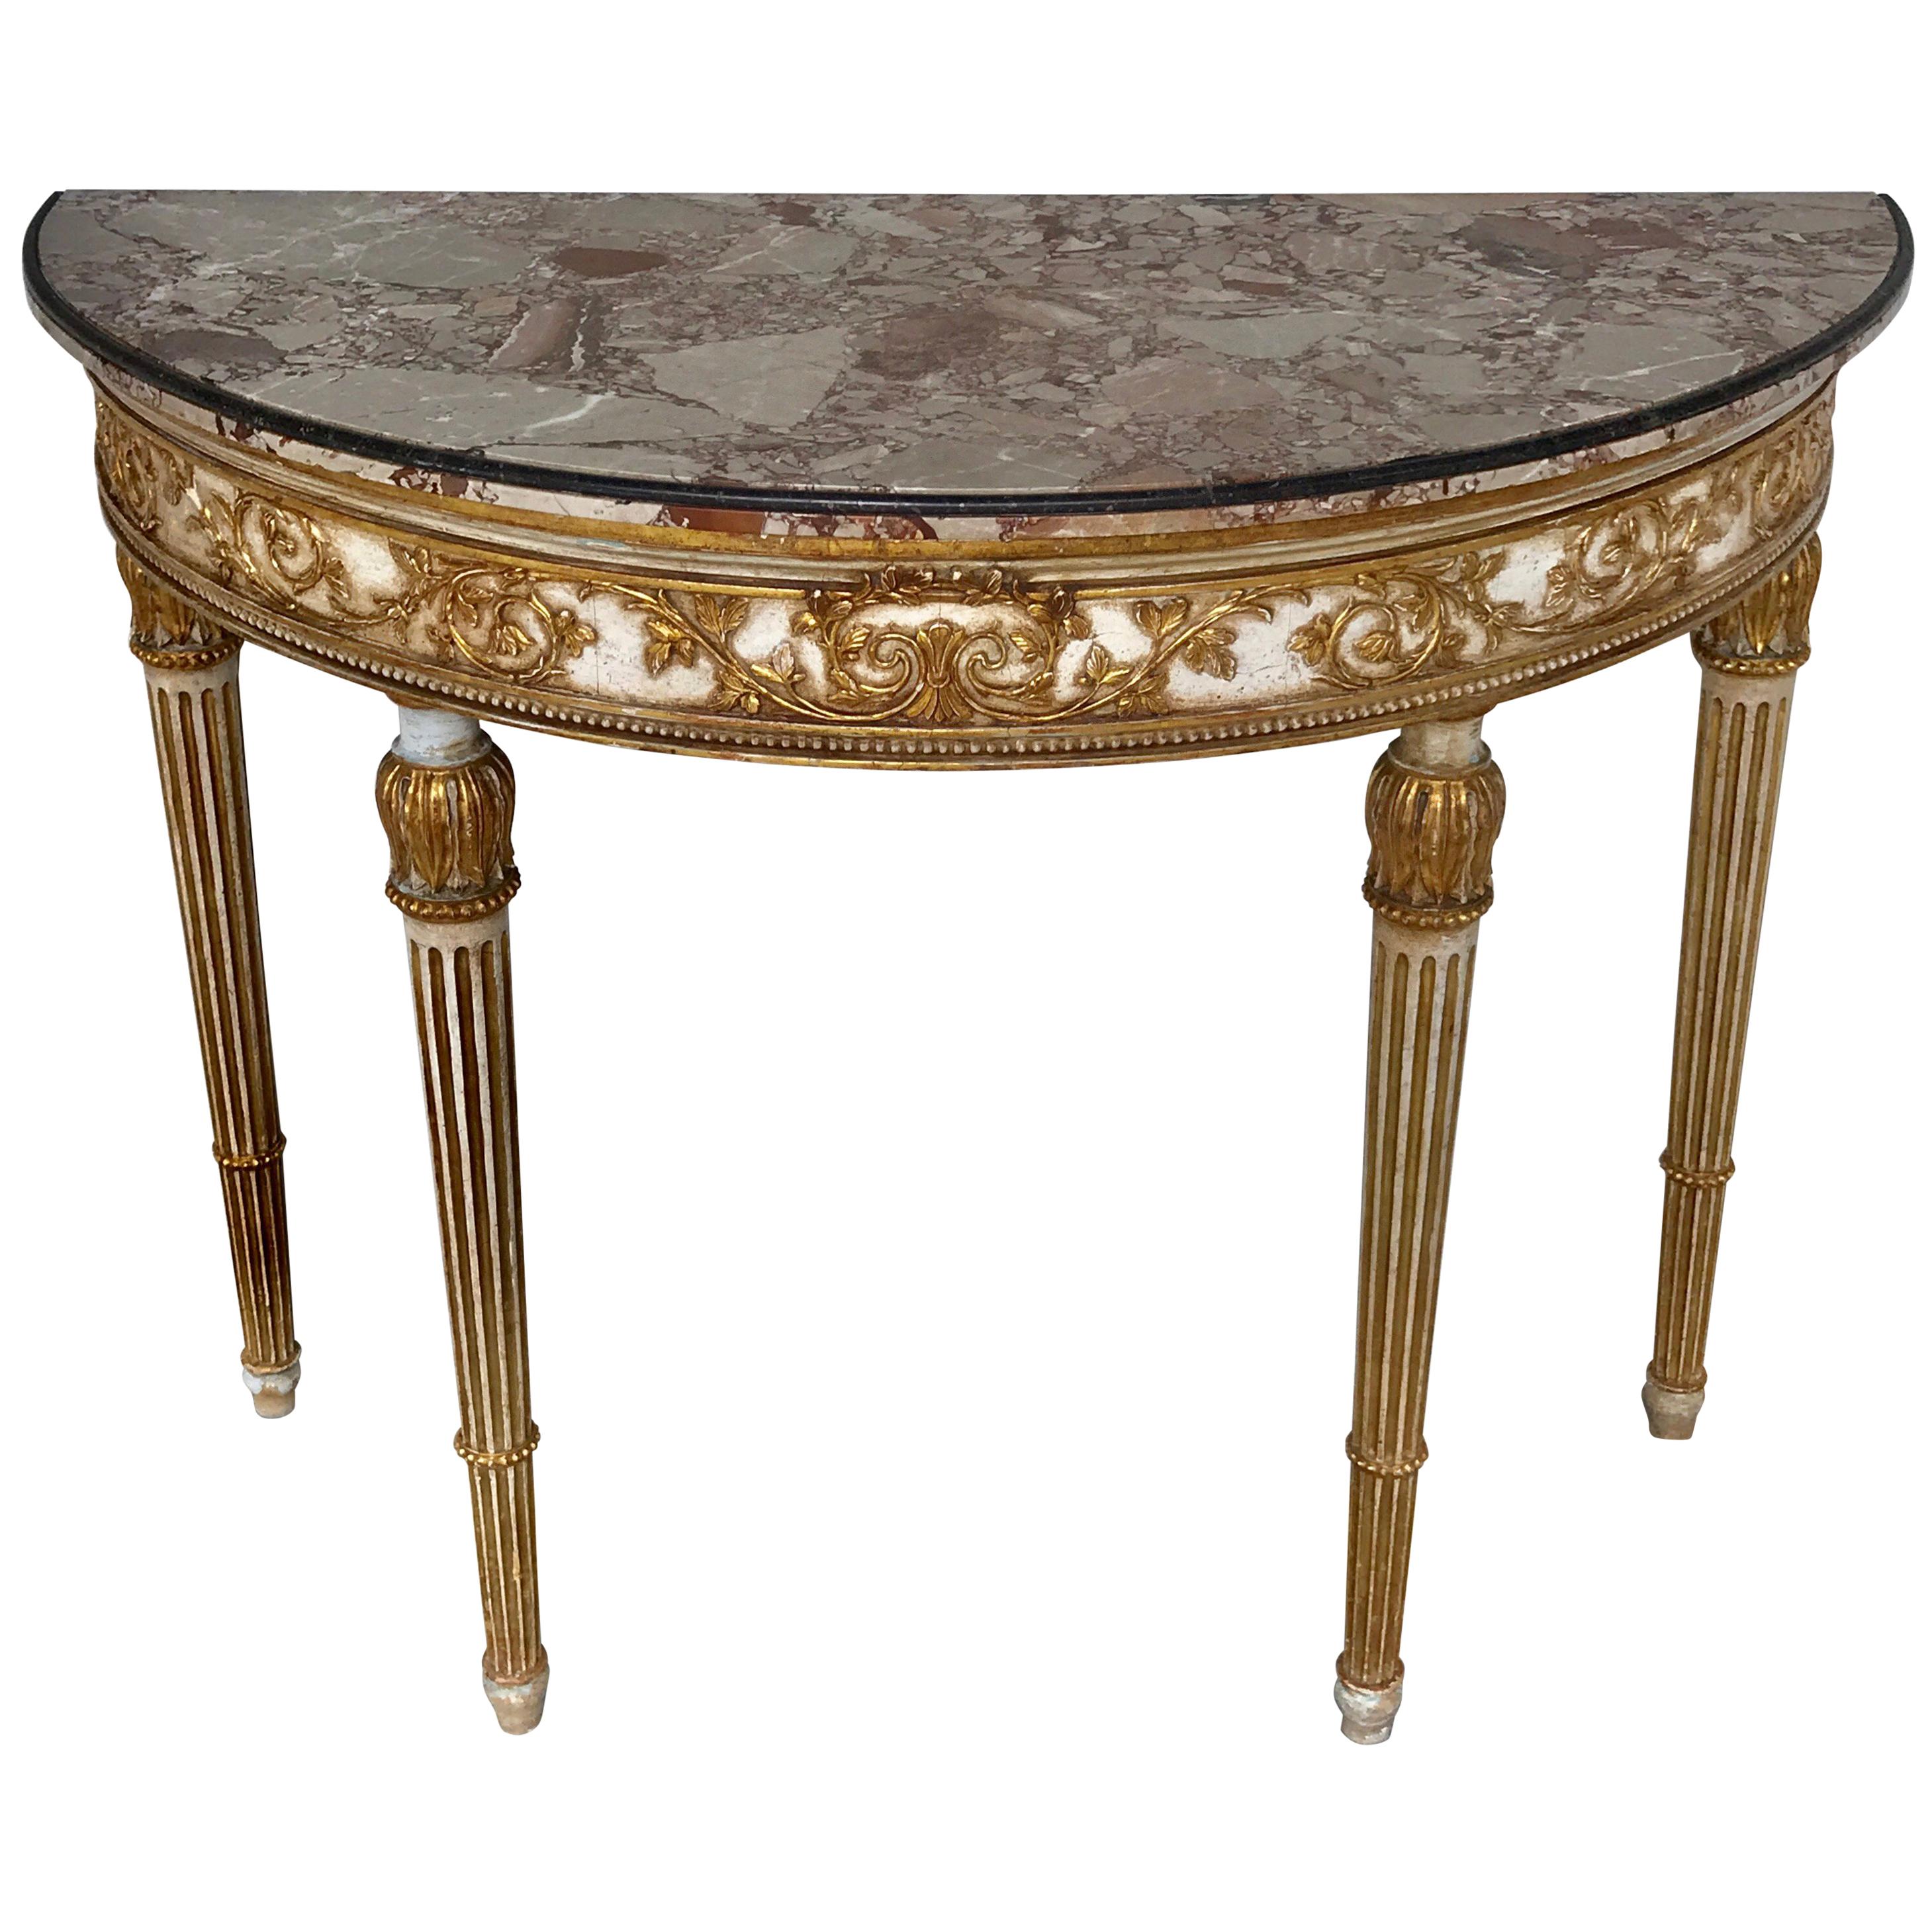 Italian Neoclassical Parcel Gilt Marble Top Console